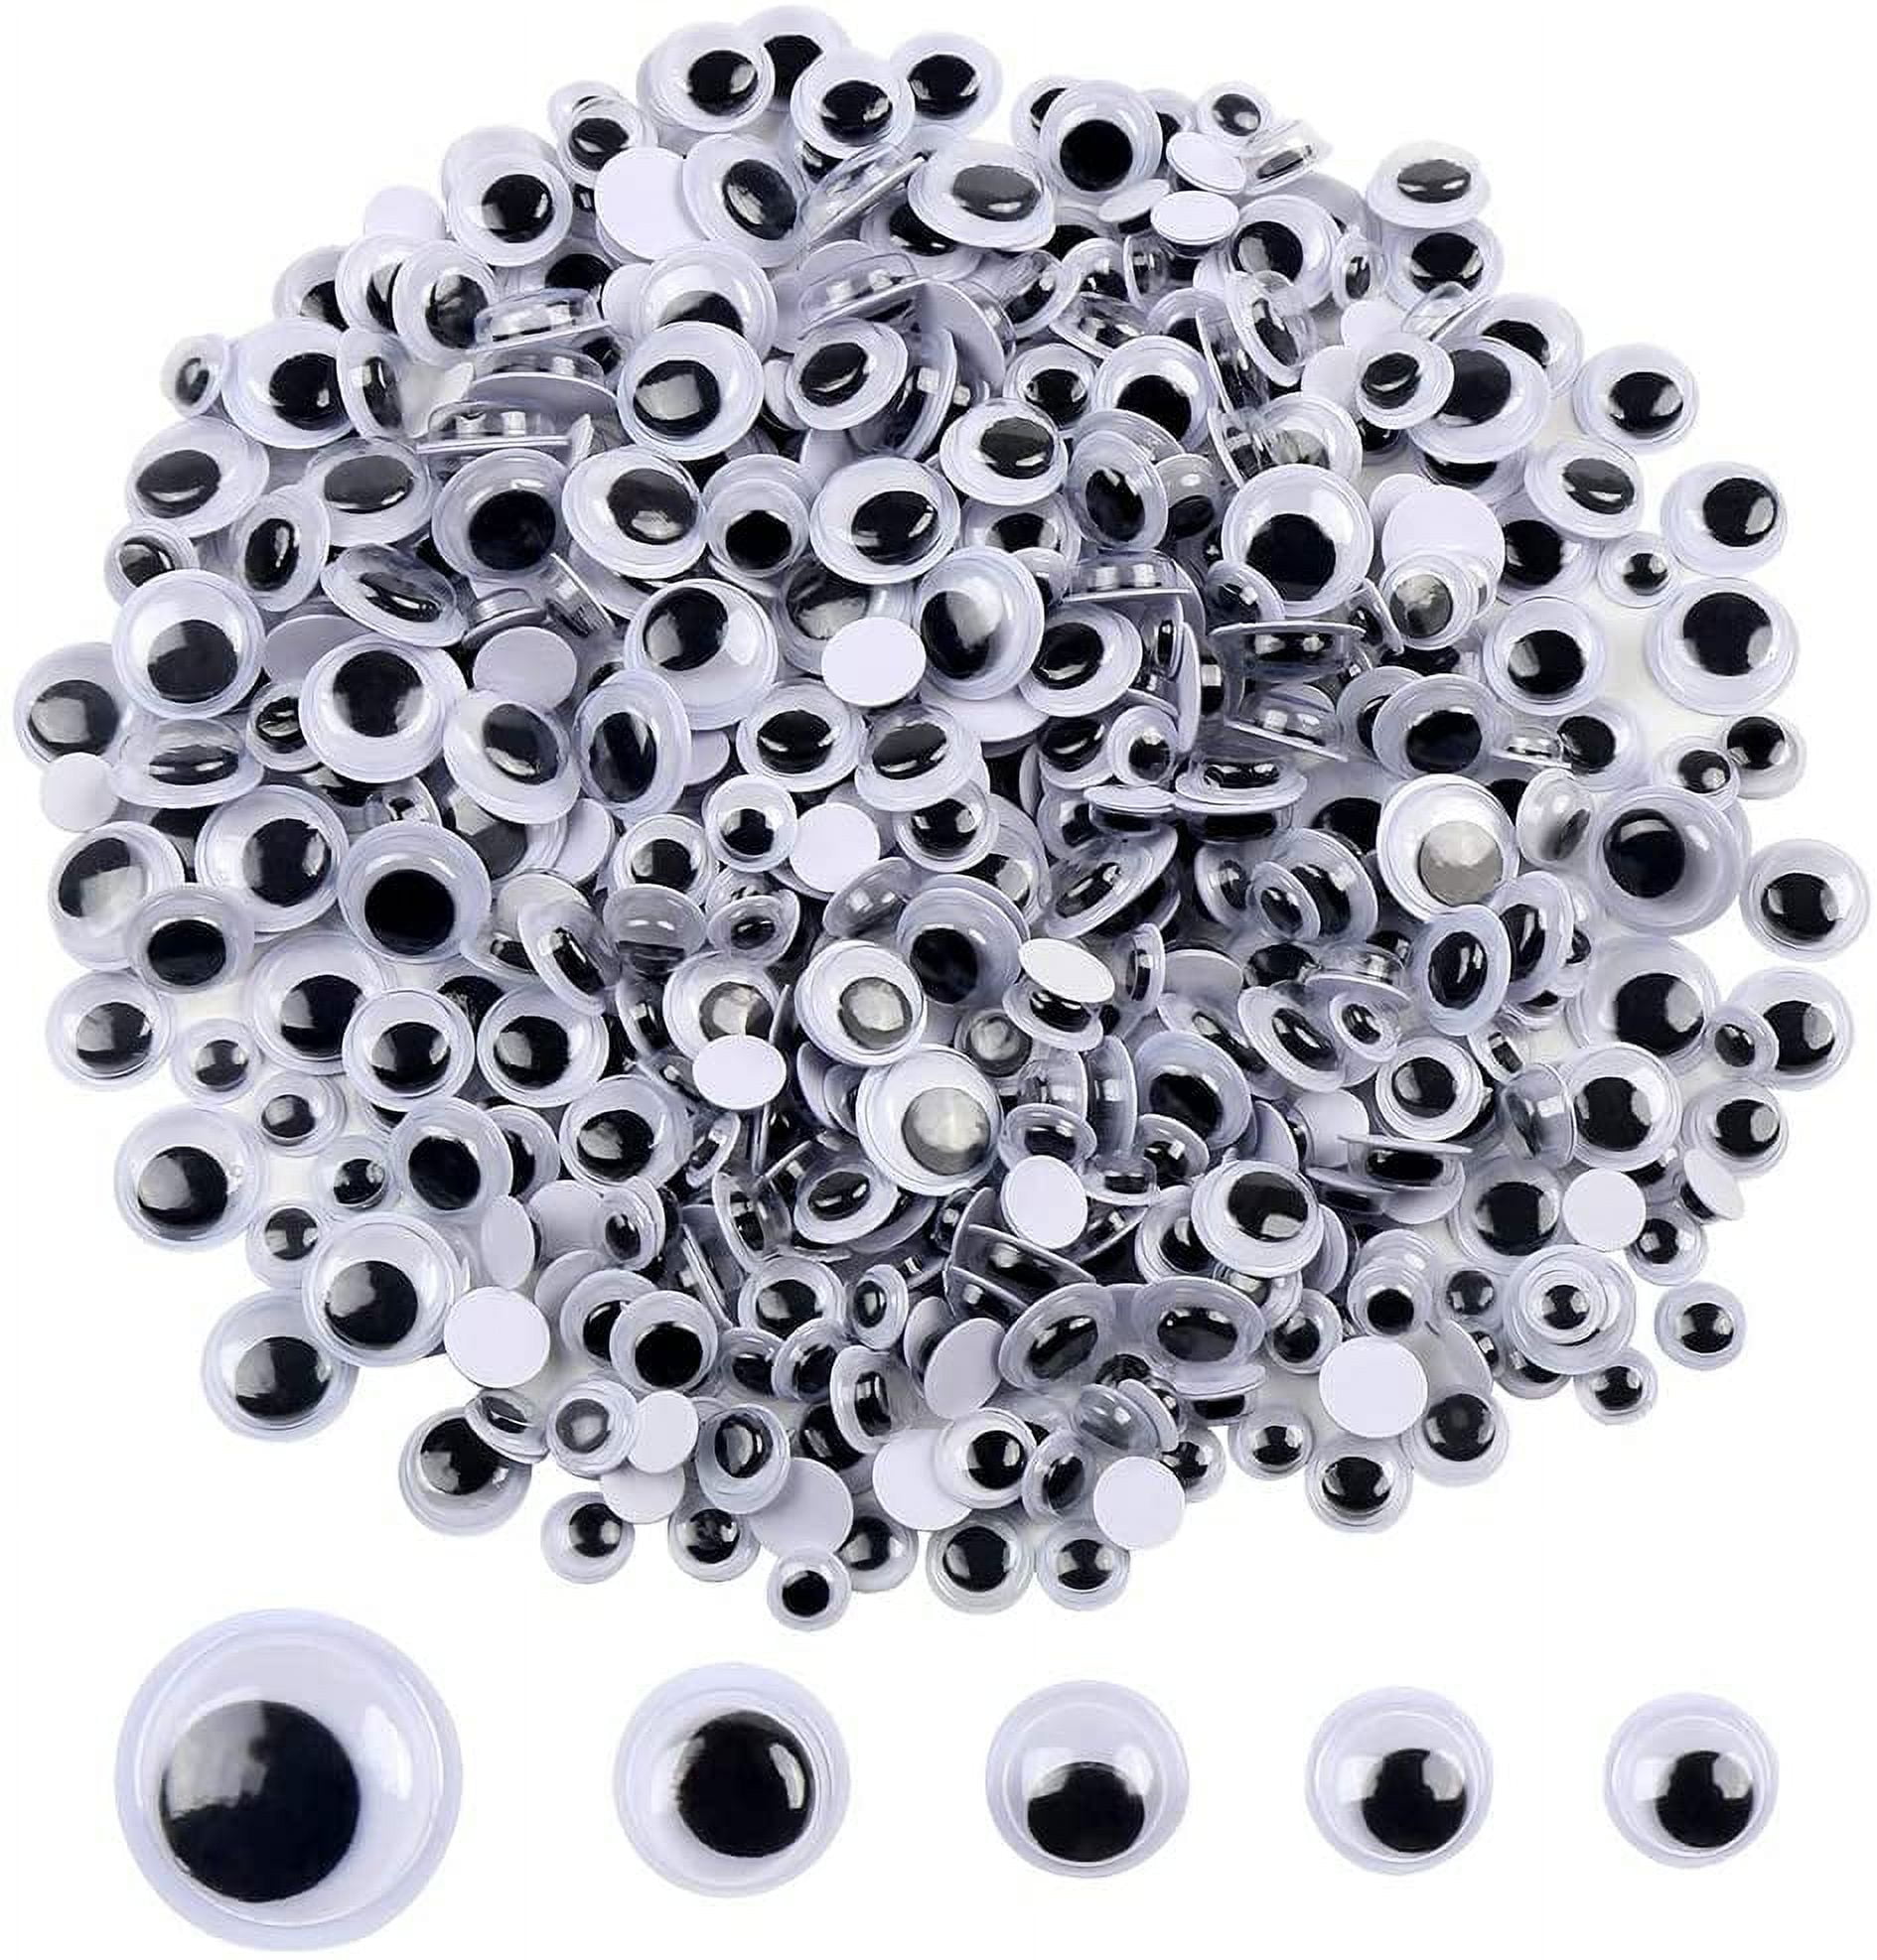 Xiasen Wiggle Eyes for Crafts 3 15 Inches Self Adhesive Giant Large Self Stick Google Eyes 4 Pack for Crafts Decoration Accessories White Black